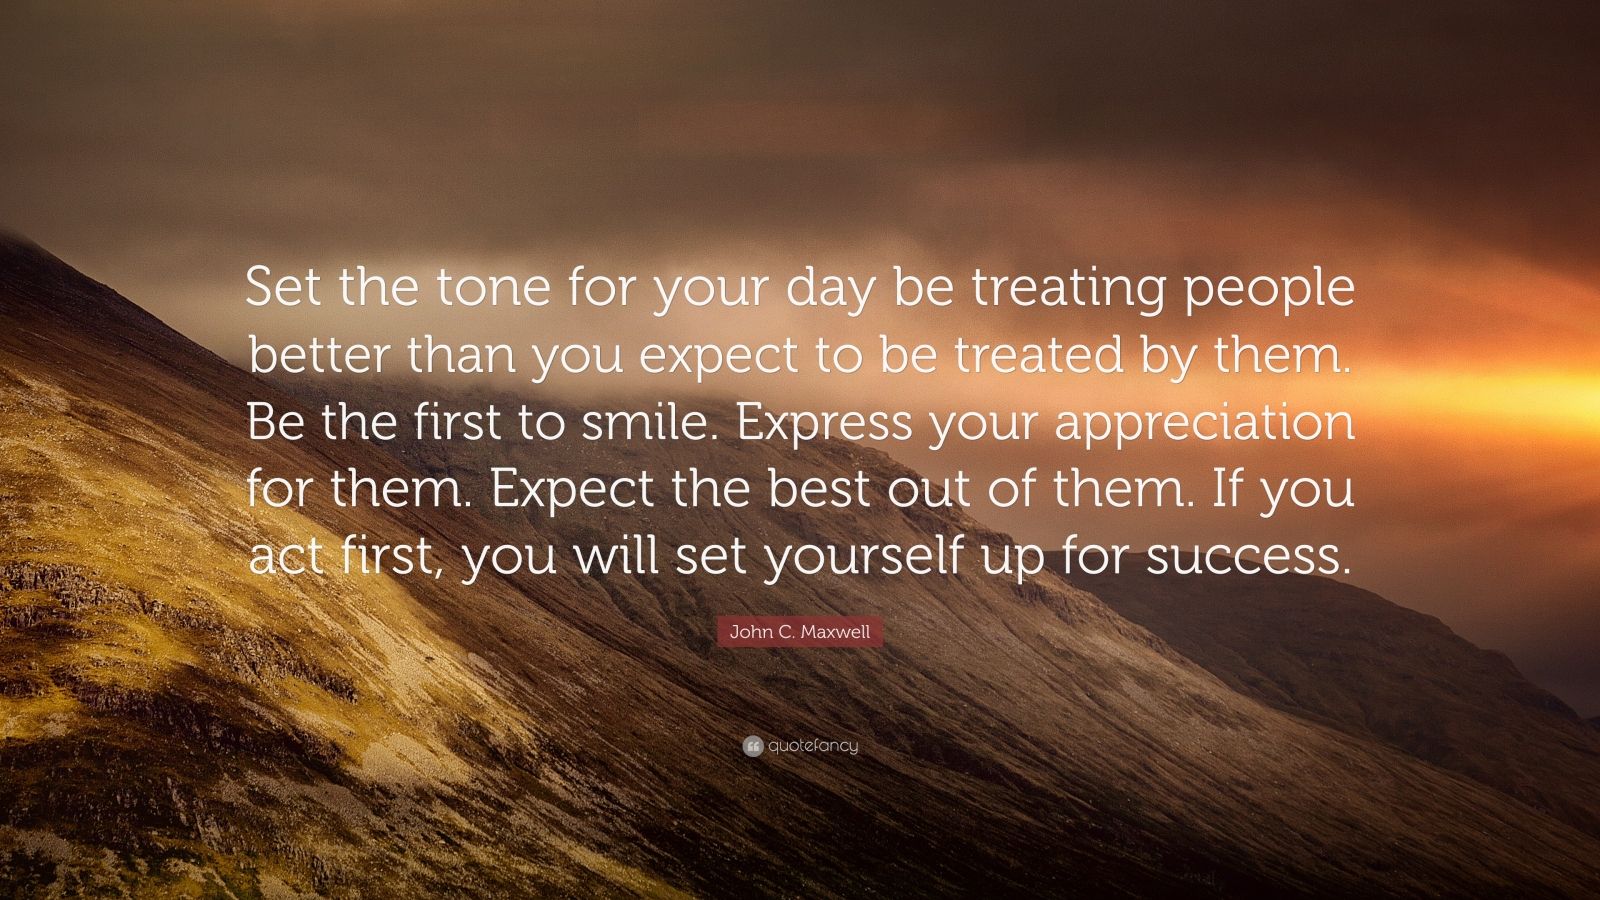 John C. Maxwell Quote: “Set the tone for your day be treating people